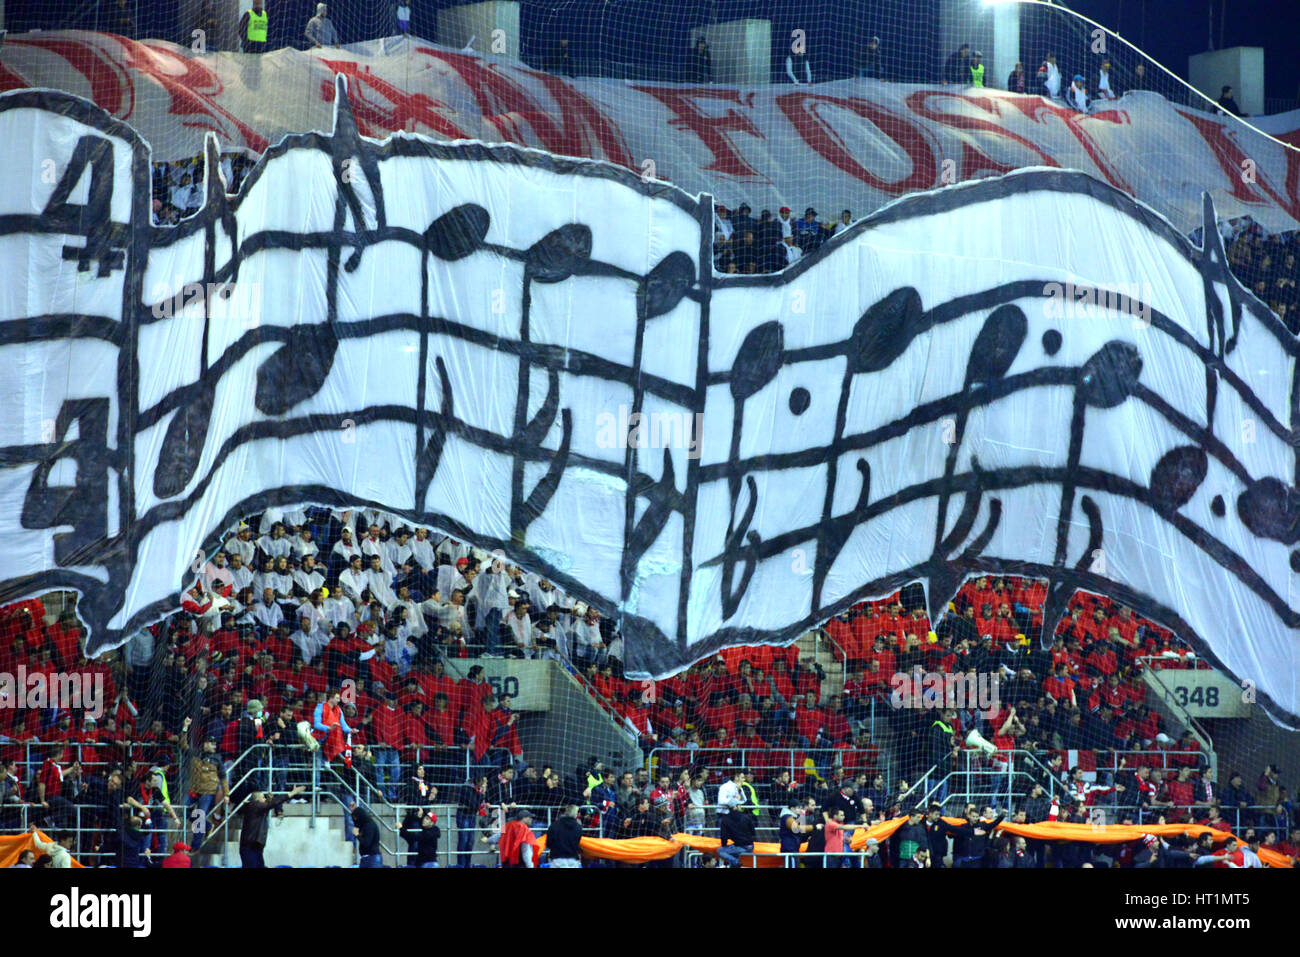 BUCHAREST - APRIL 17: Choreography of soccer fans of Dinamo Bucharest during a match against Steaua Bucharest, in the National Arena stadium, final sc Stock Photo